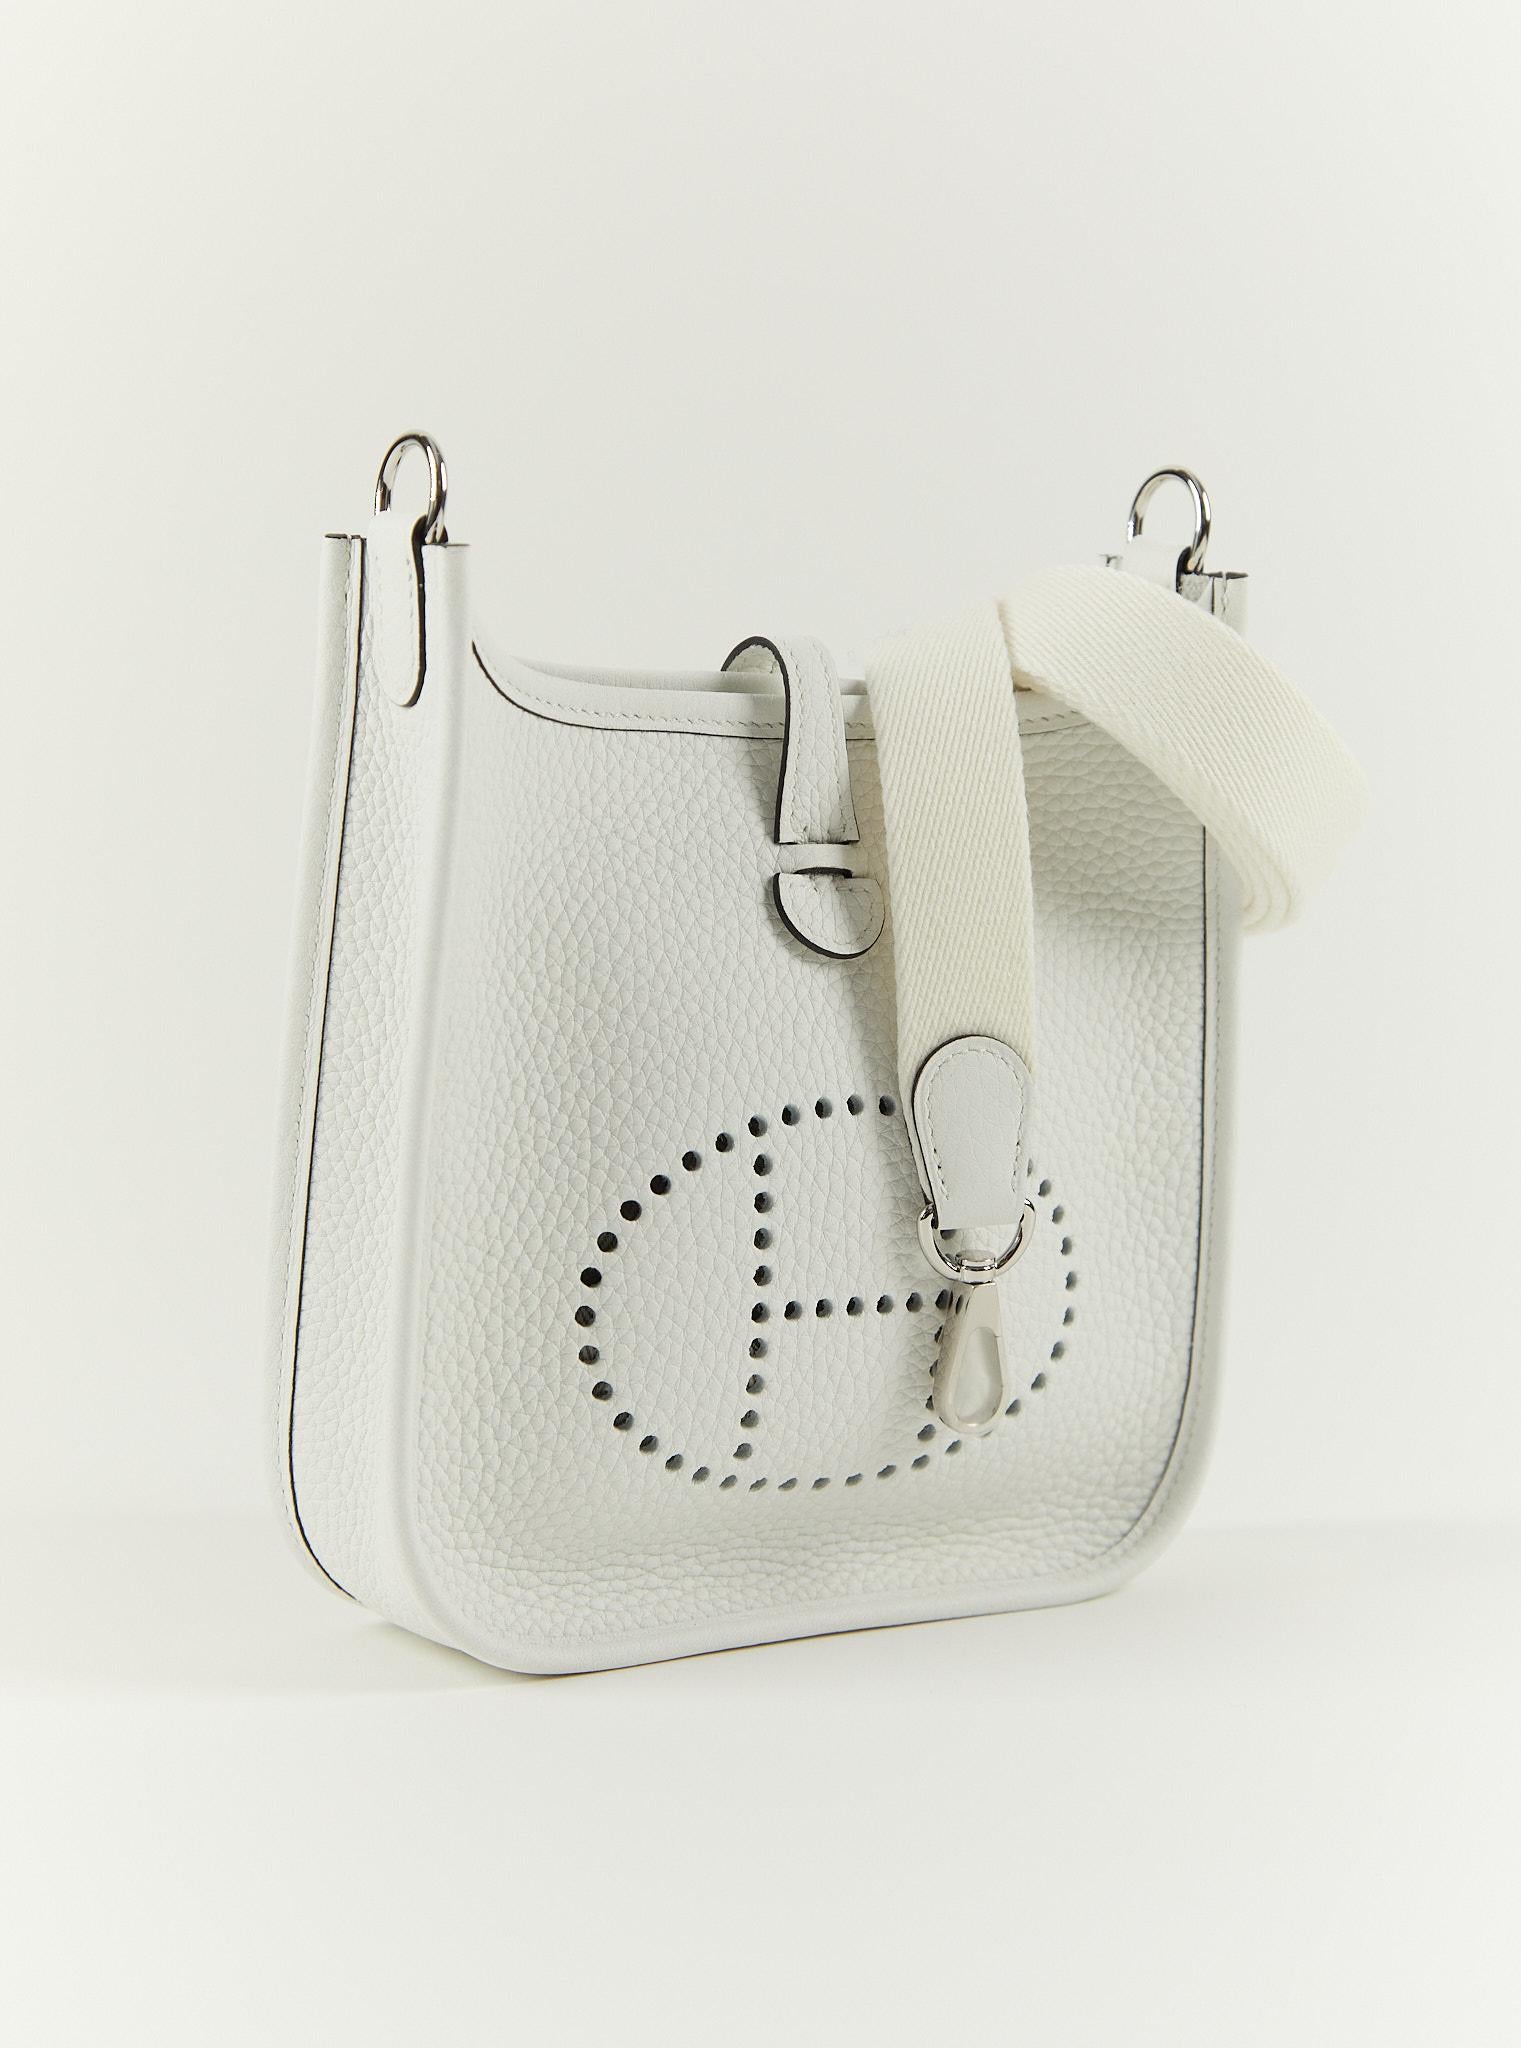 Hermès Mini Evelyne TPM in New White

Clemence Leather with Palladium Hardware 

B Stamp / 2023

Accompanied by: Original receipt, Hermes box, Hermes dustbag, shoulder strap, shoulder strap dustbag, care card and ribbon

Measurements: L 16 x H 18 x